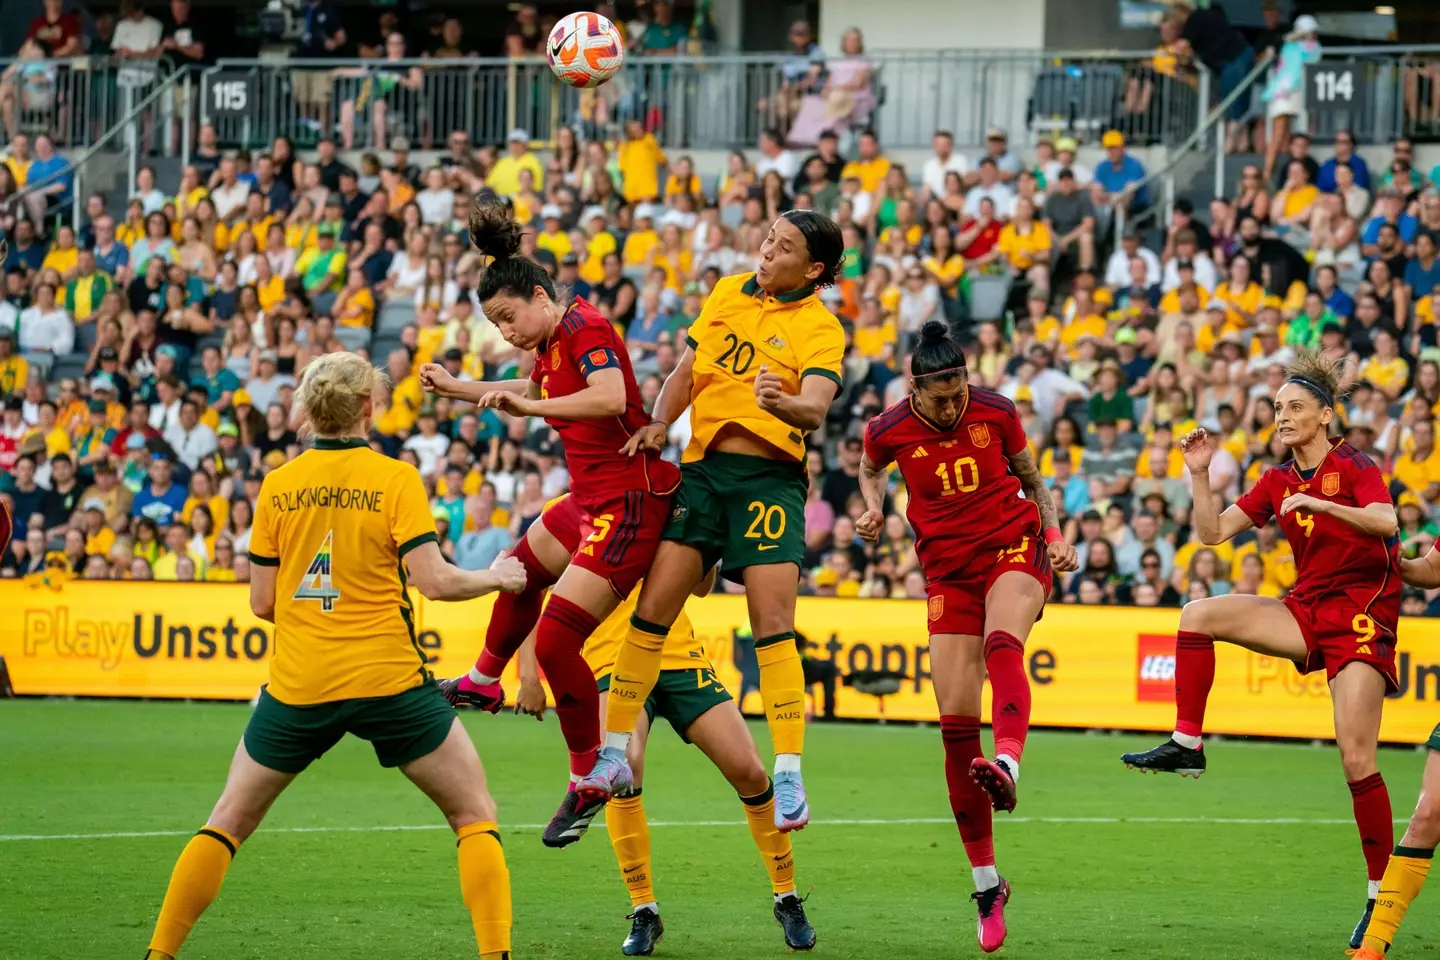 Sam Kerr of the Matildas challenging for the ball.